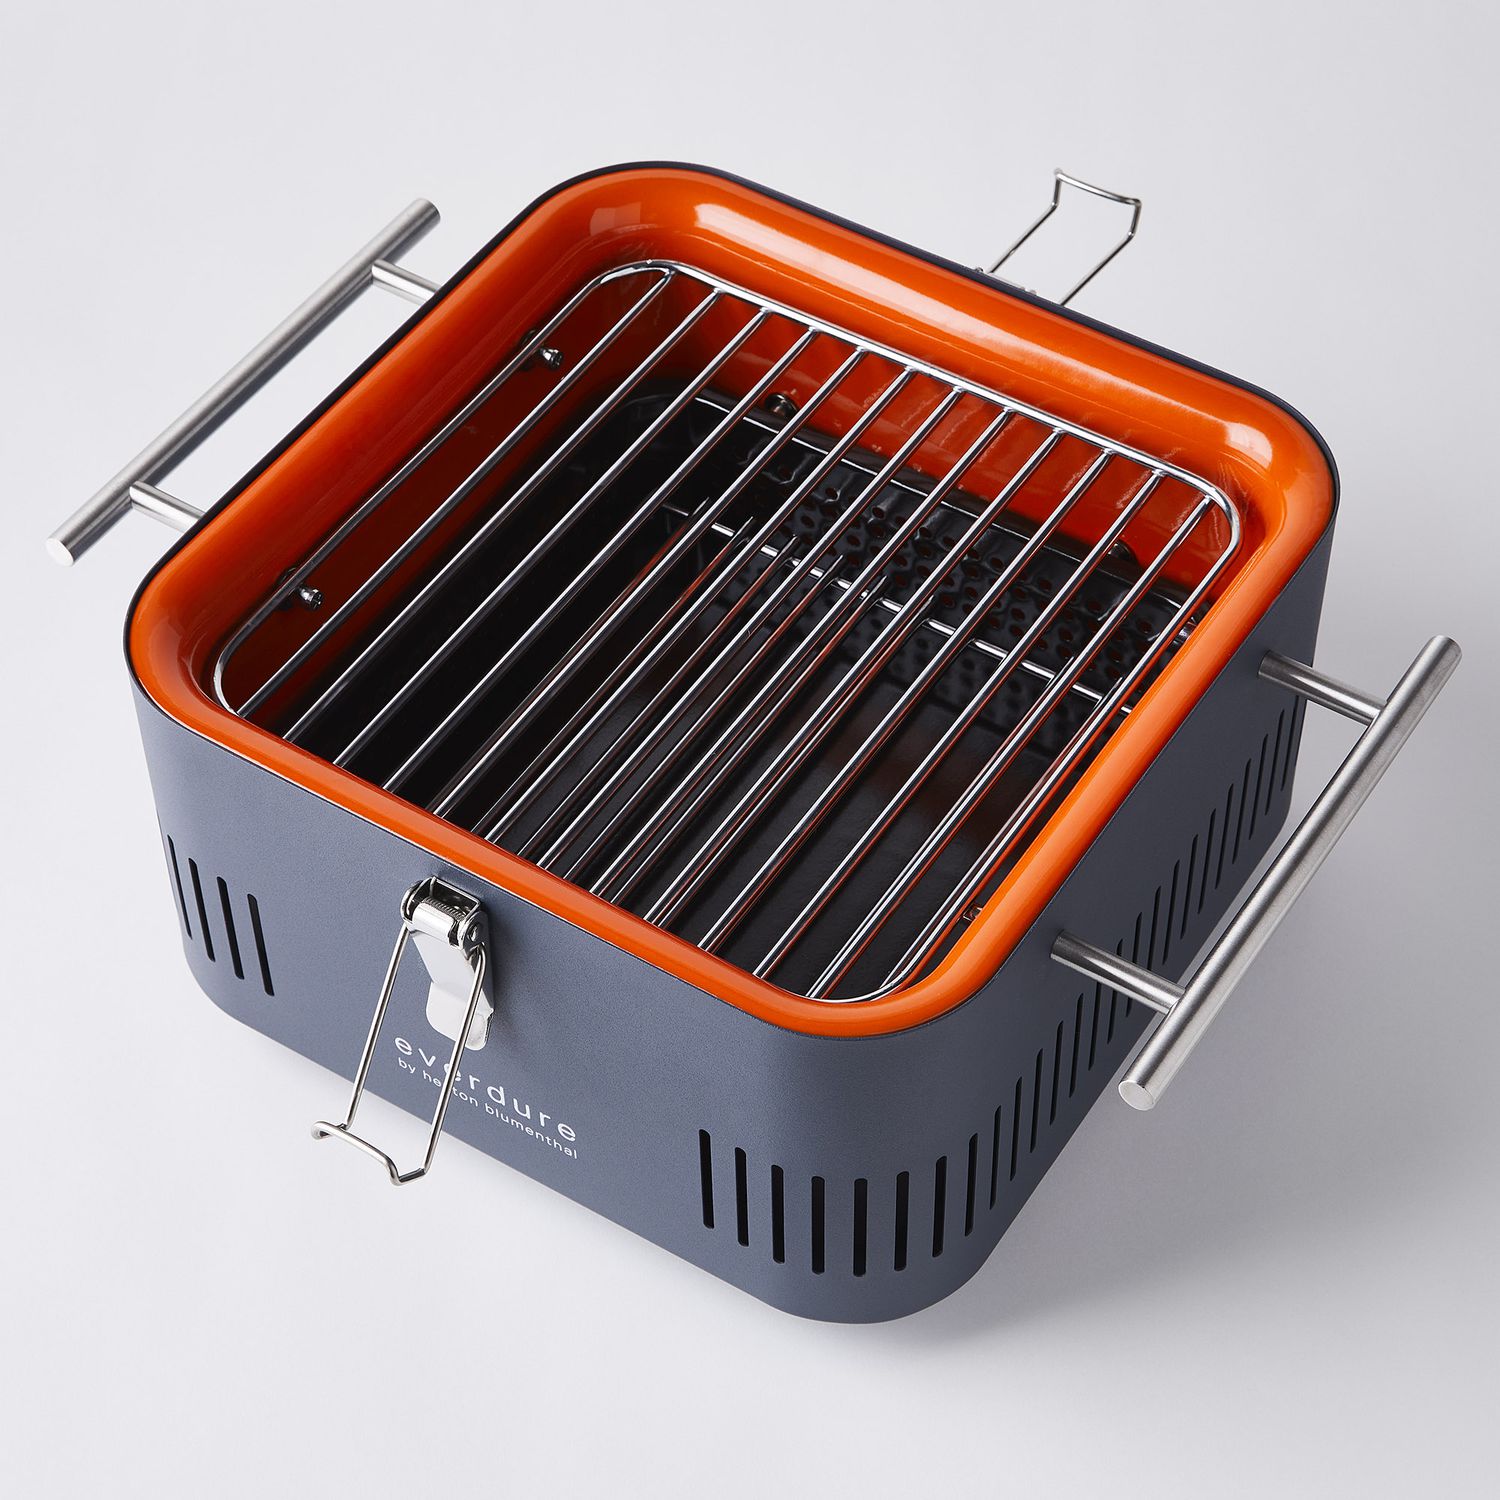 logik jord Exert Everdure CUBE Portable Charcoal Grill for Travel BBQing in 2 Colors on  Food52